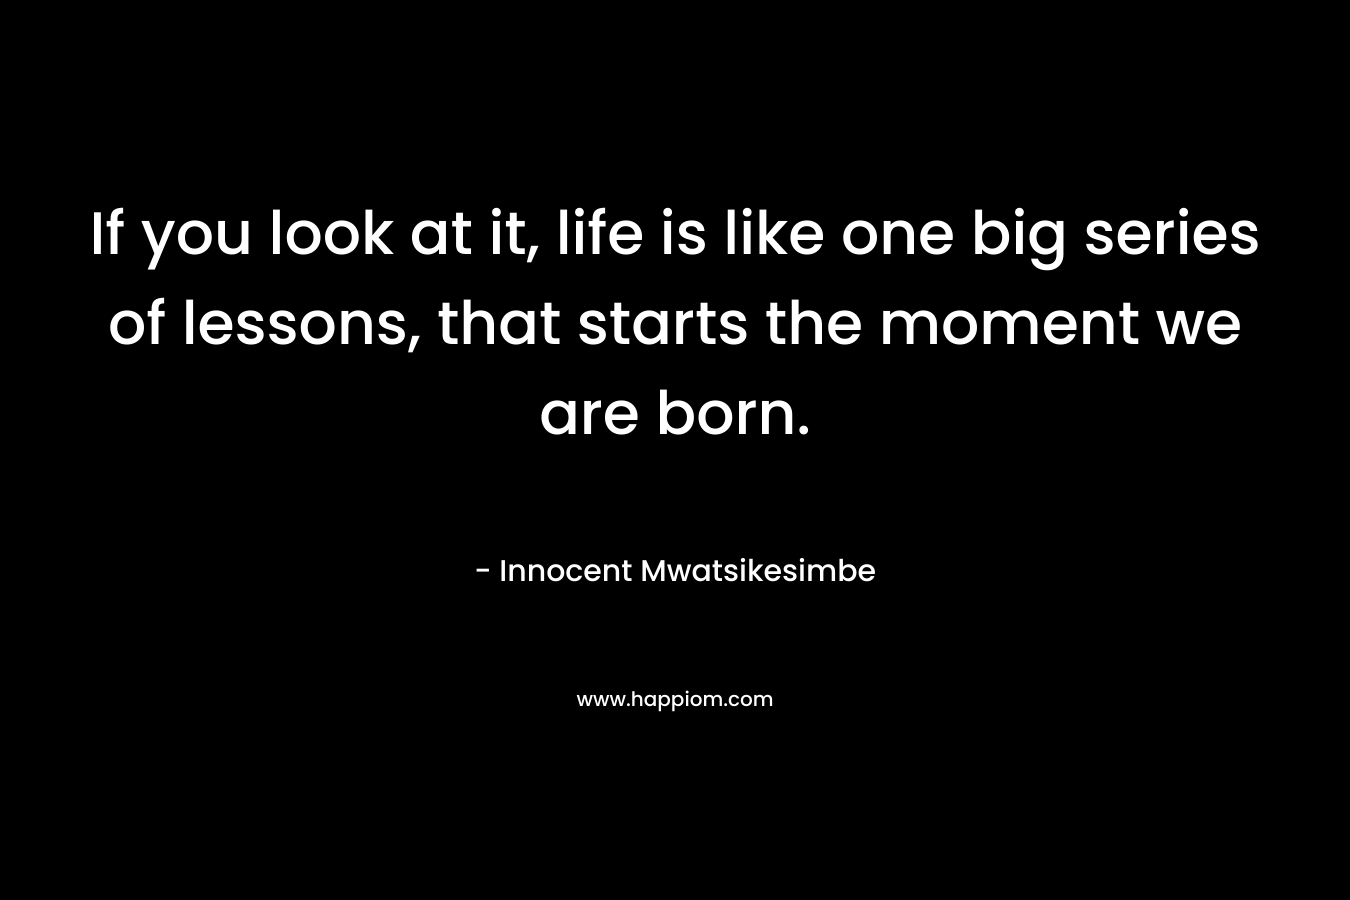 If you look at it, life is like one big series of lessons, that starts the moment we are born.